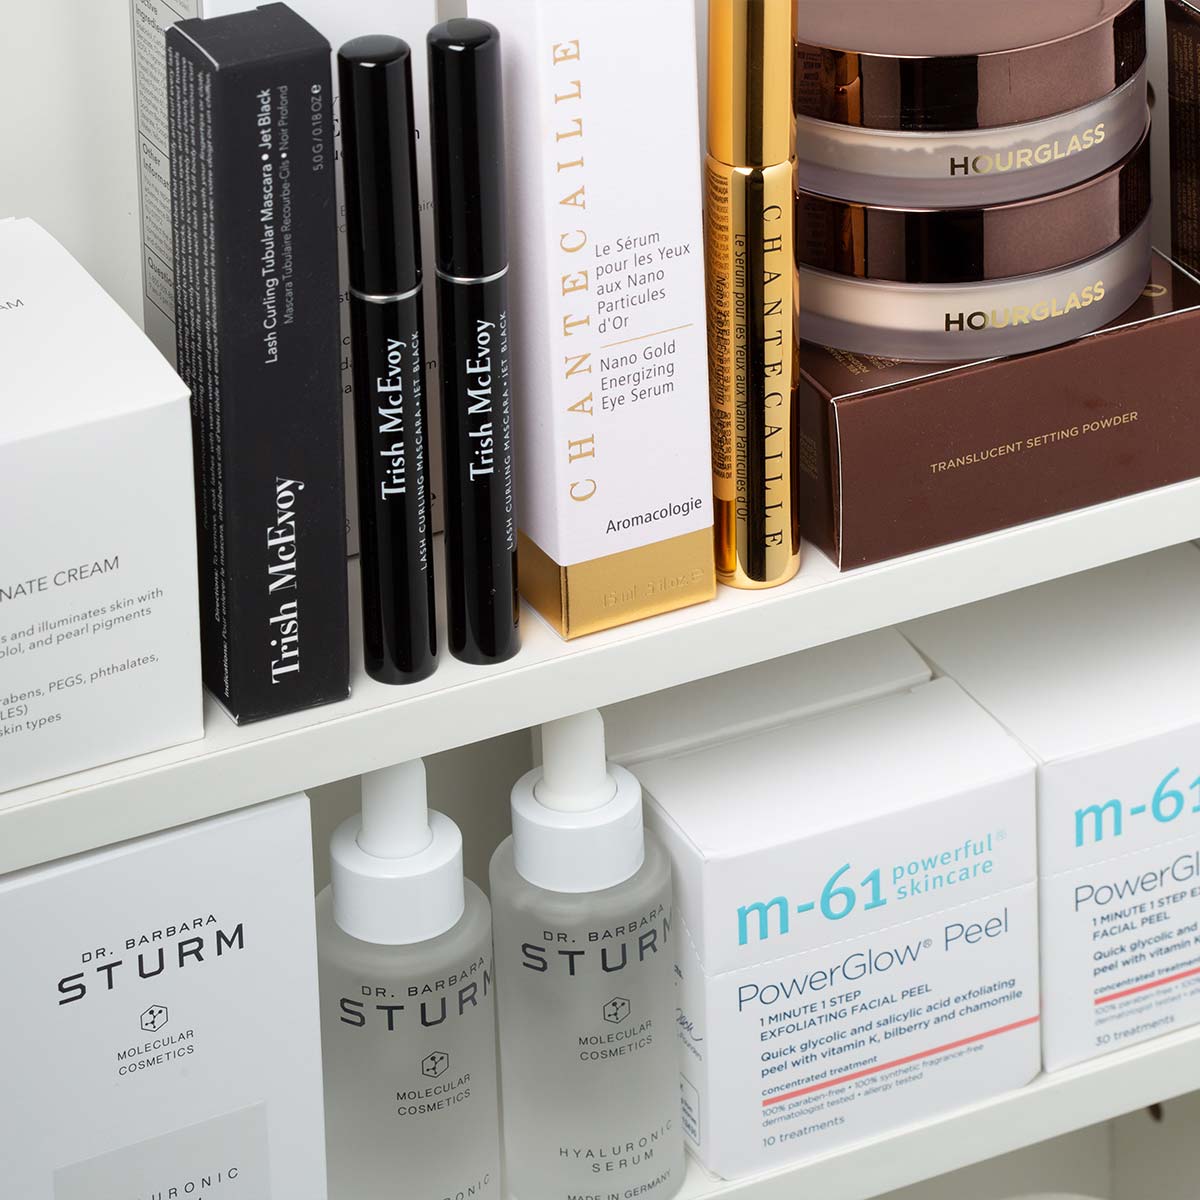 The products from Skincare Routine by Skin Type on a shelf